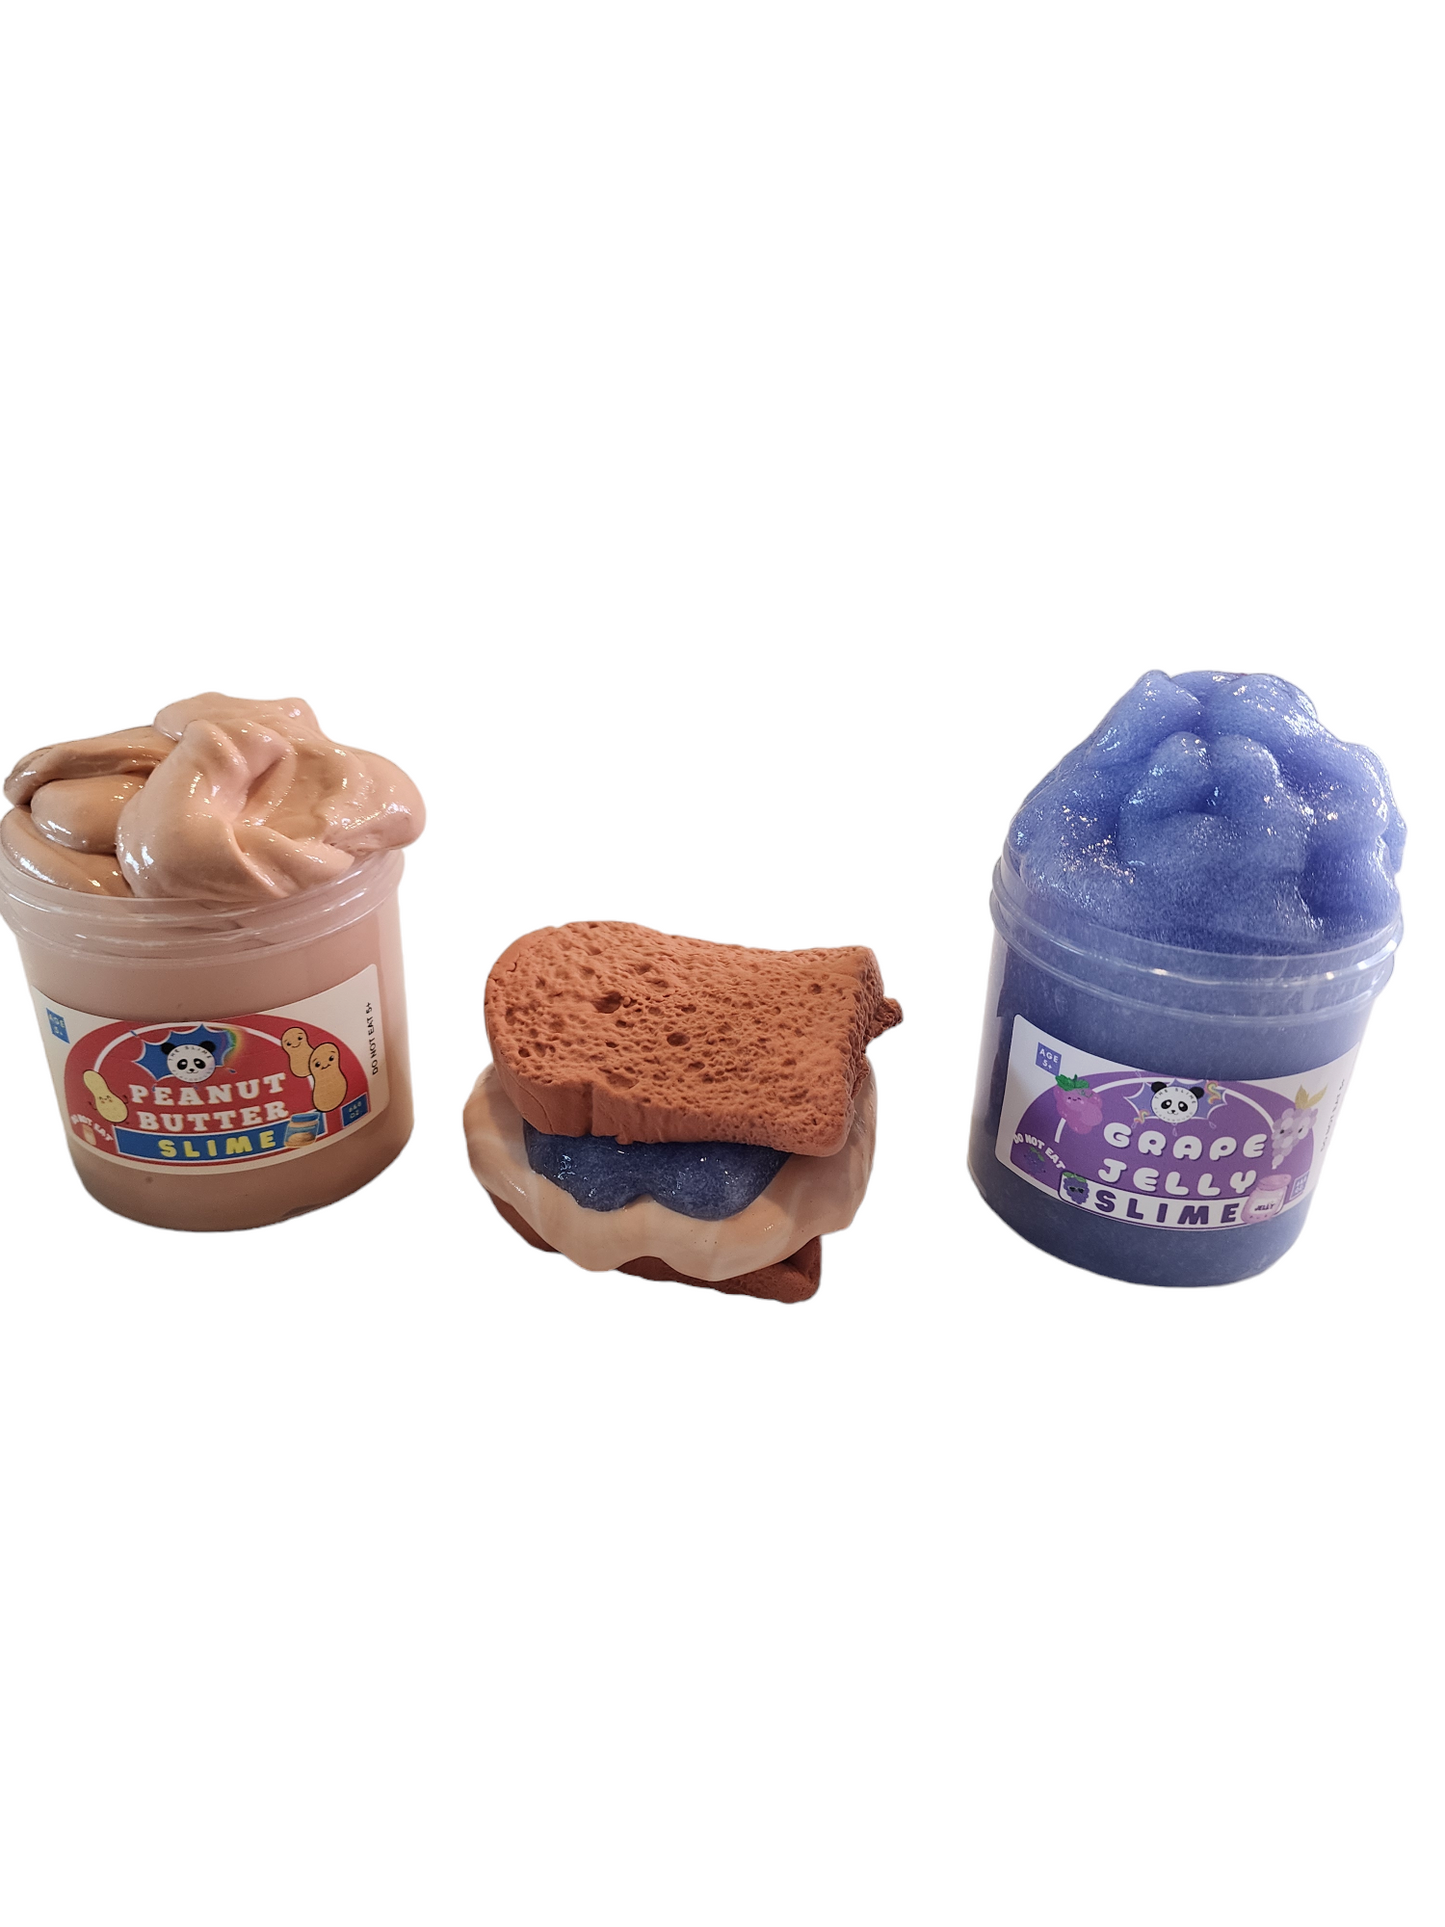 Peanut Butter and Jelly Sandwich Slime